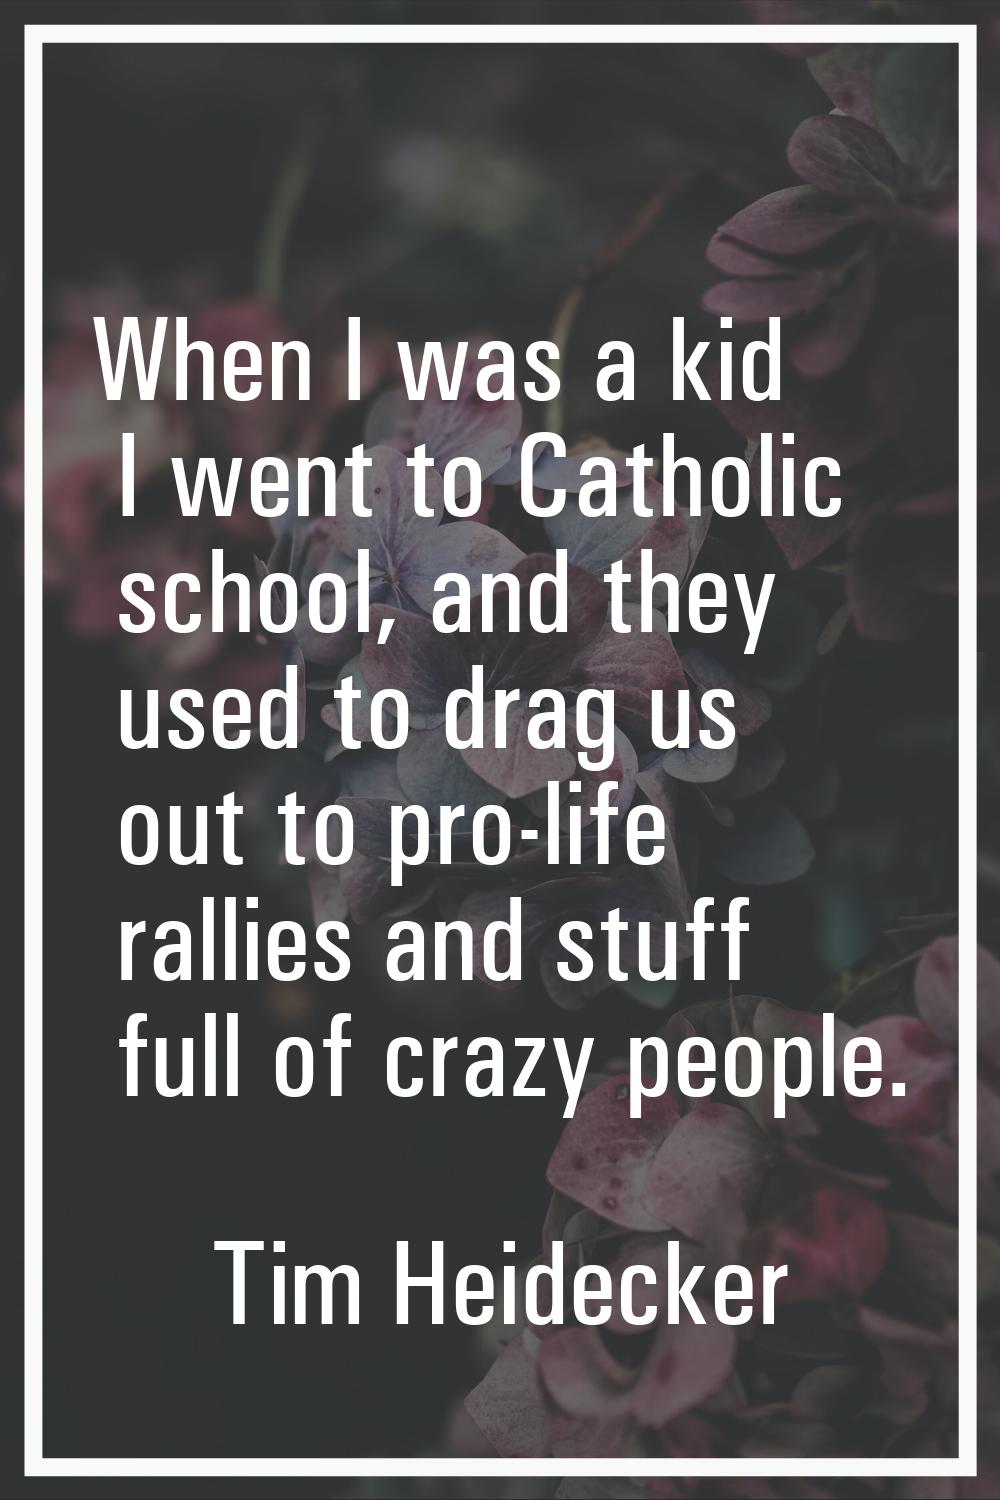 When I was a kid I went to Catholic school, and they used to drag us out to pro-life rallies and st